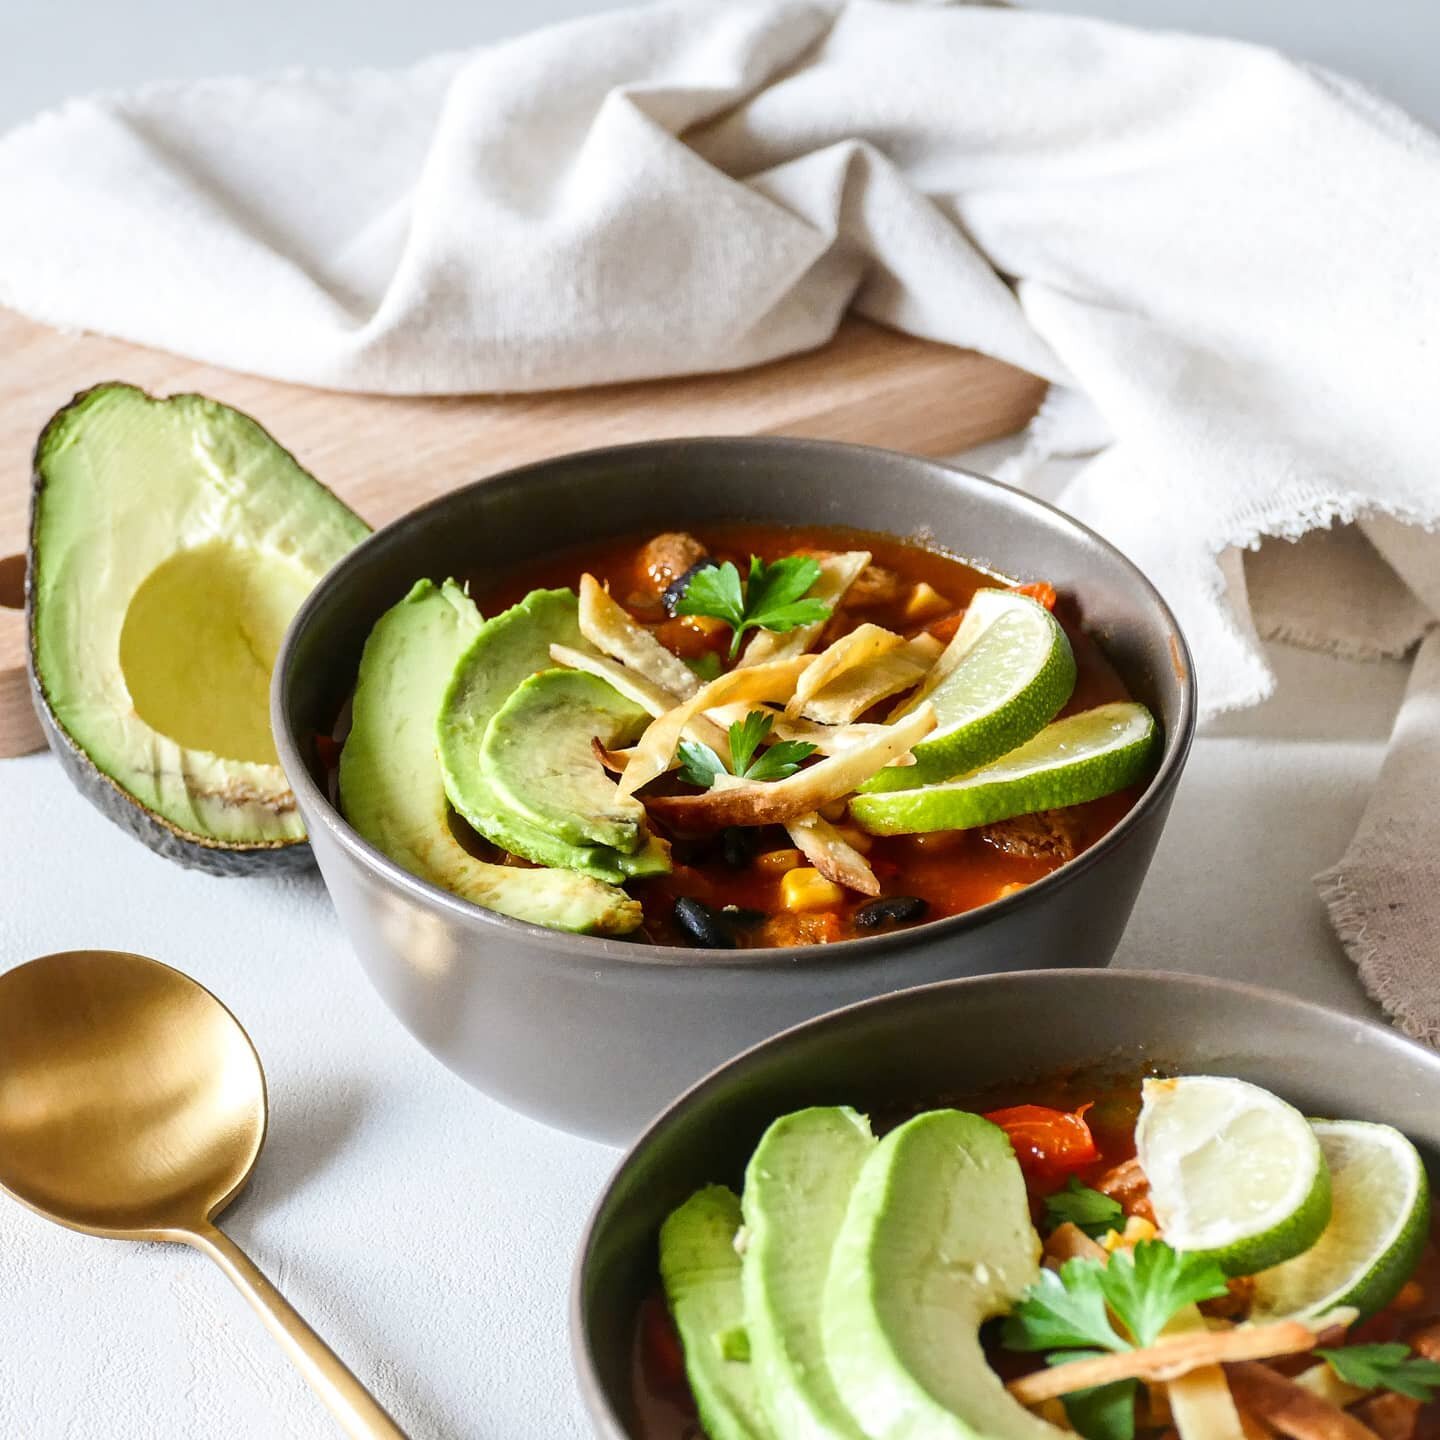 🍲&quot;Chicken&quot; Tortilla Soup - This is probably the easiest and tastiest soup you&rsquo;ll ever have😍
Just a bunch of ingredients and you&rsquo;ll be able to enjoy a warm &ldquo;chicken&rdquo; tortilla soup. The lime and the avocado make this